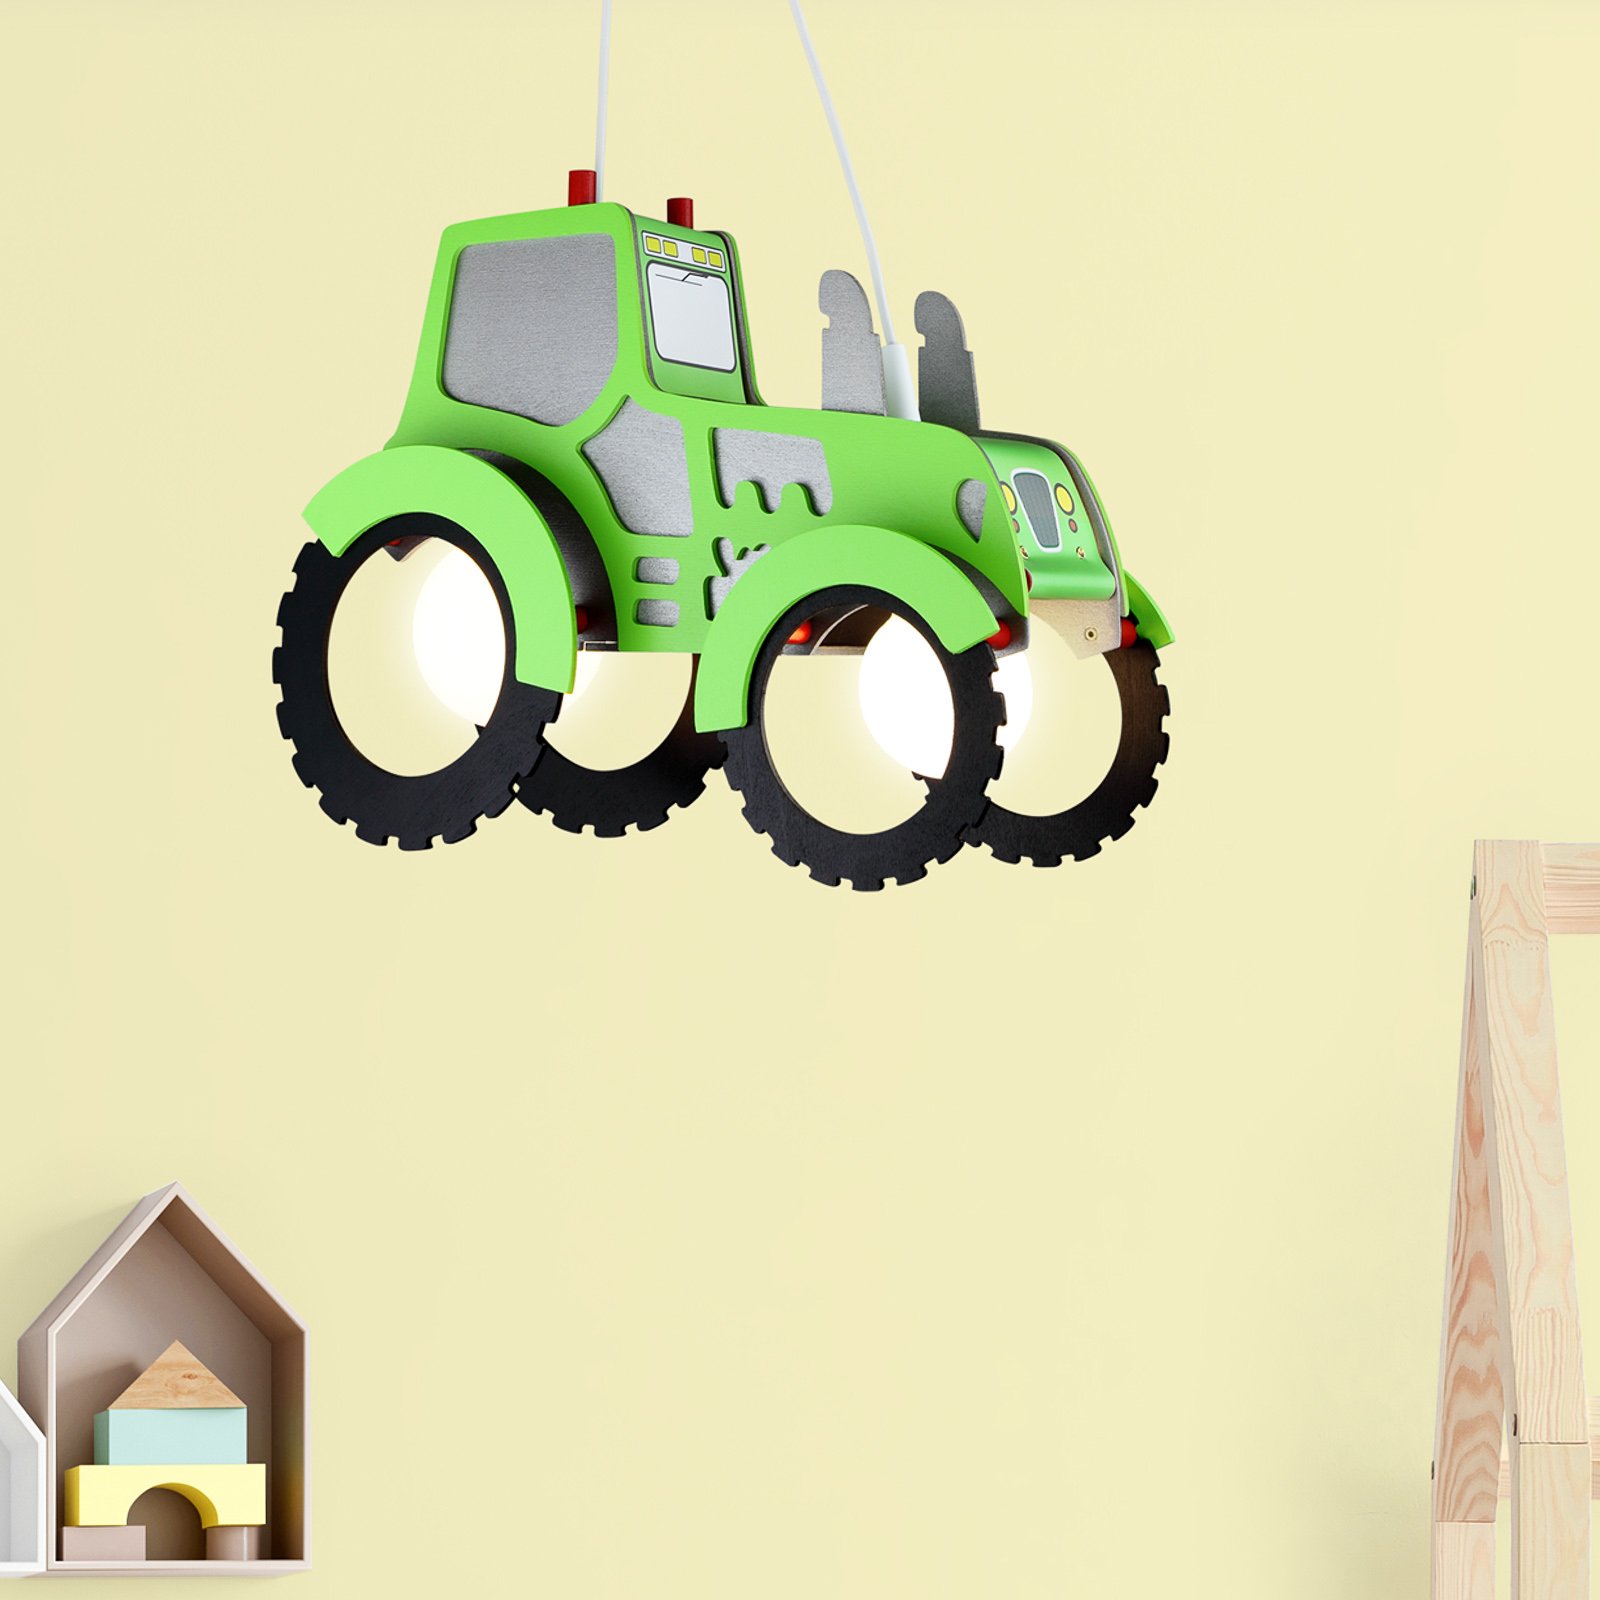 Tractor pendant light for a child’s room